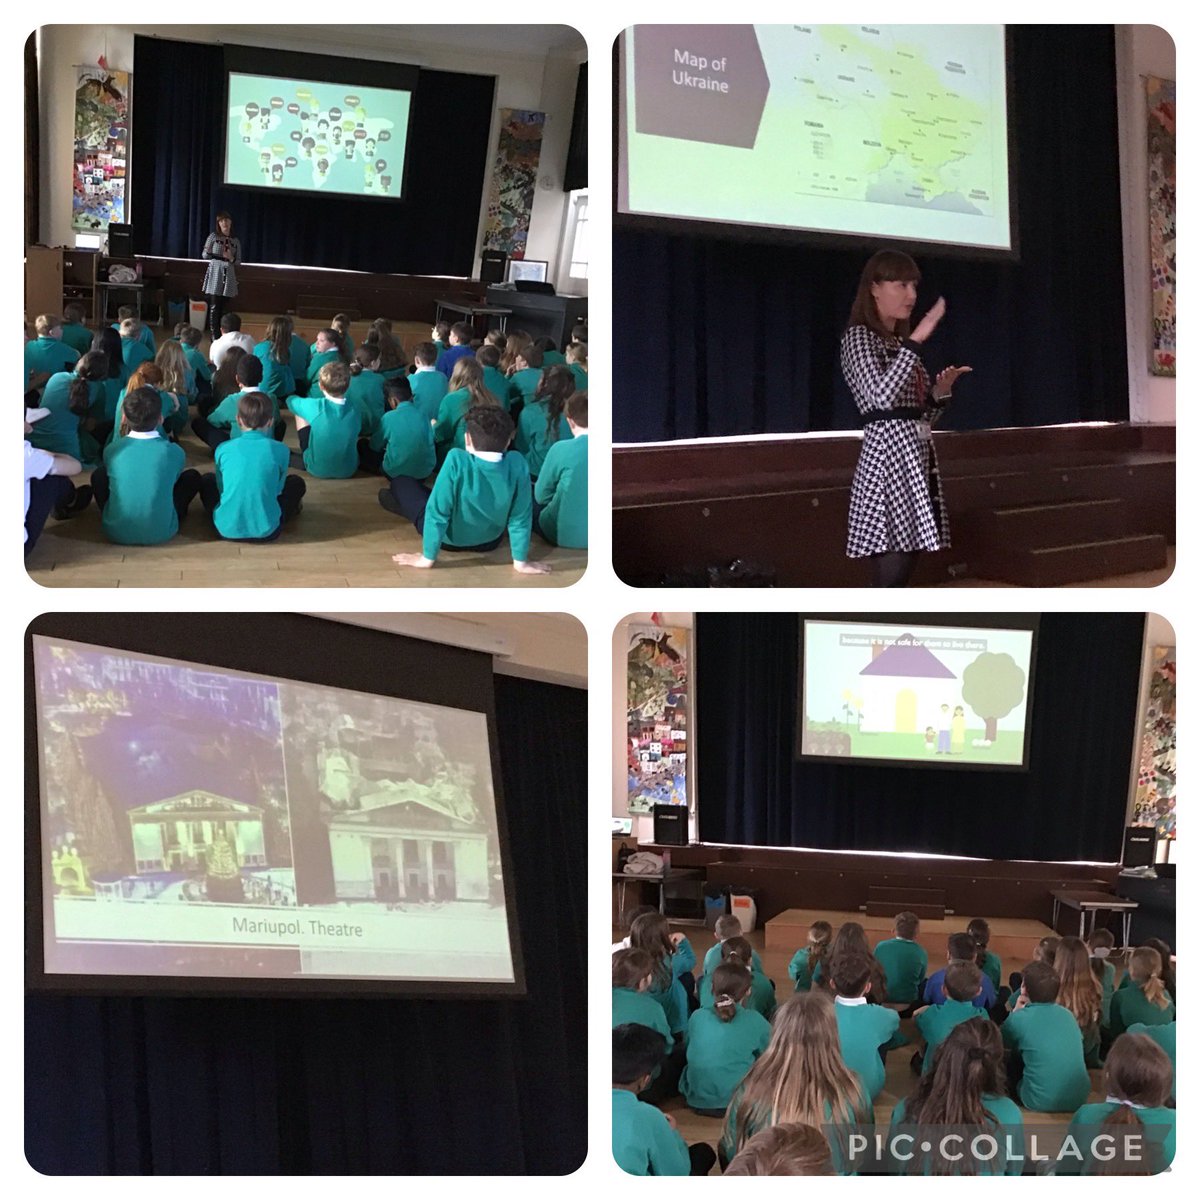 A huge thank you to @irene_kovalenko for such a fascinating talk this afternoon. The whole of KS2 loved it. Diolch for sharing your journey with us. #SchoolOfSanctuary #EthicalInformedCitizens #RefugeesWelcome